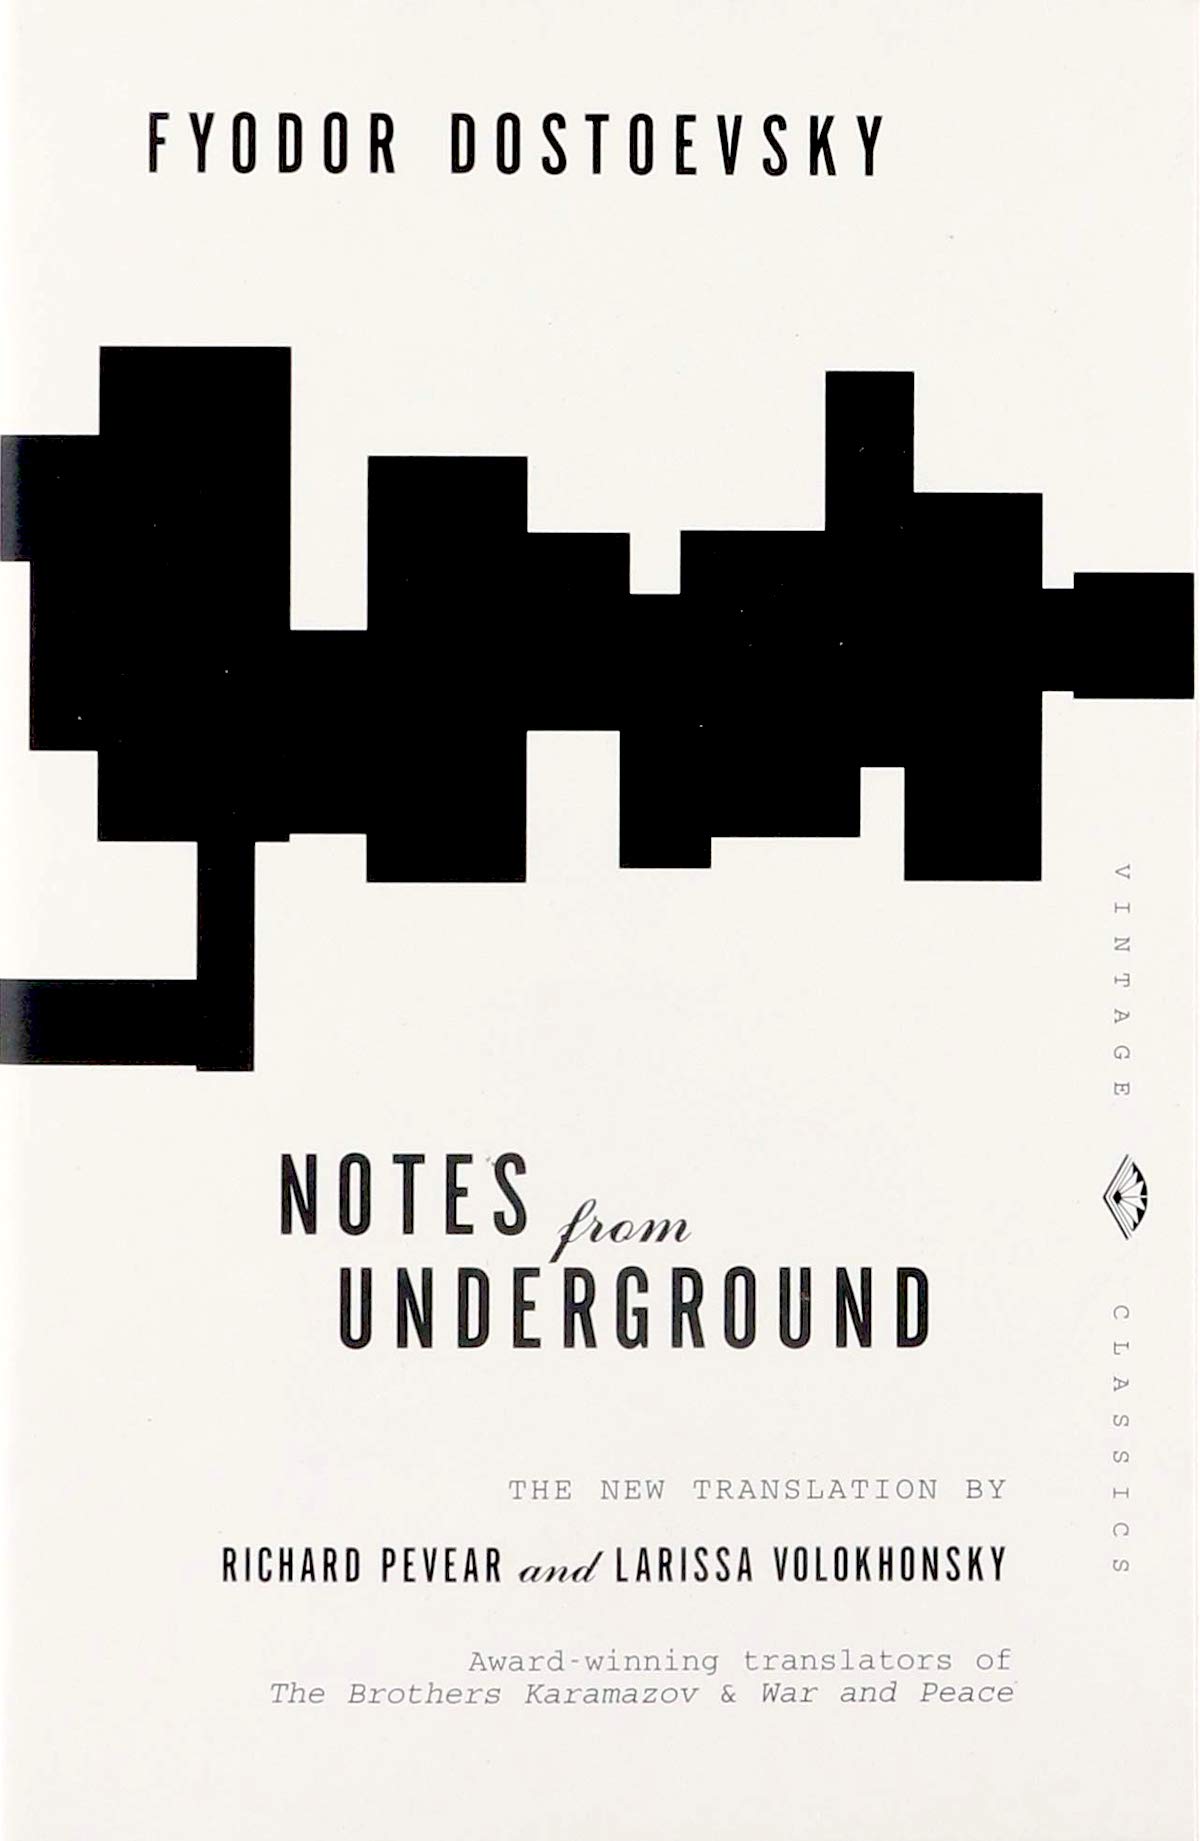 A-Review-Notes-From-Underground-by-Fyodor-Dostoevsky-Spin-Me-A-Book-1